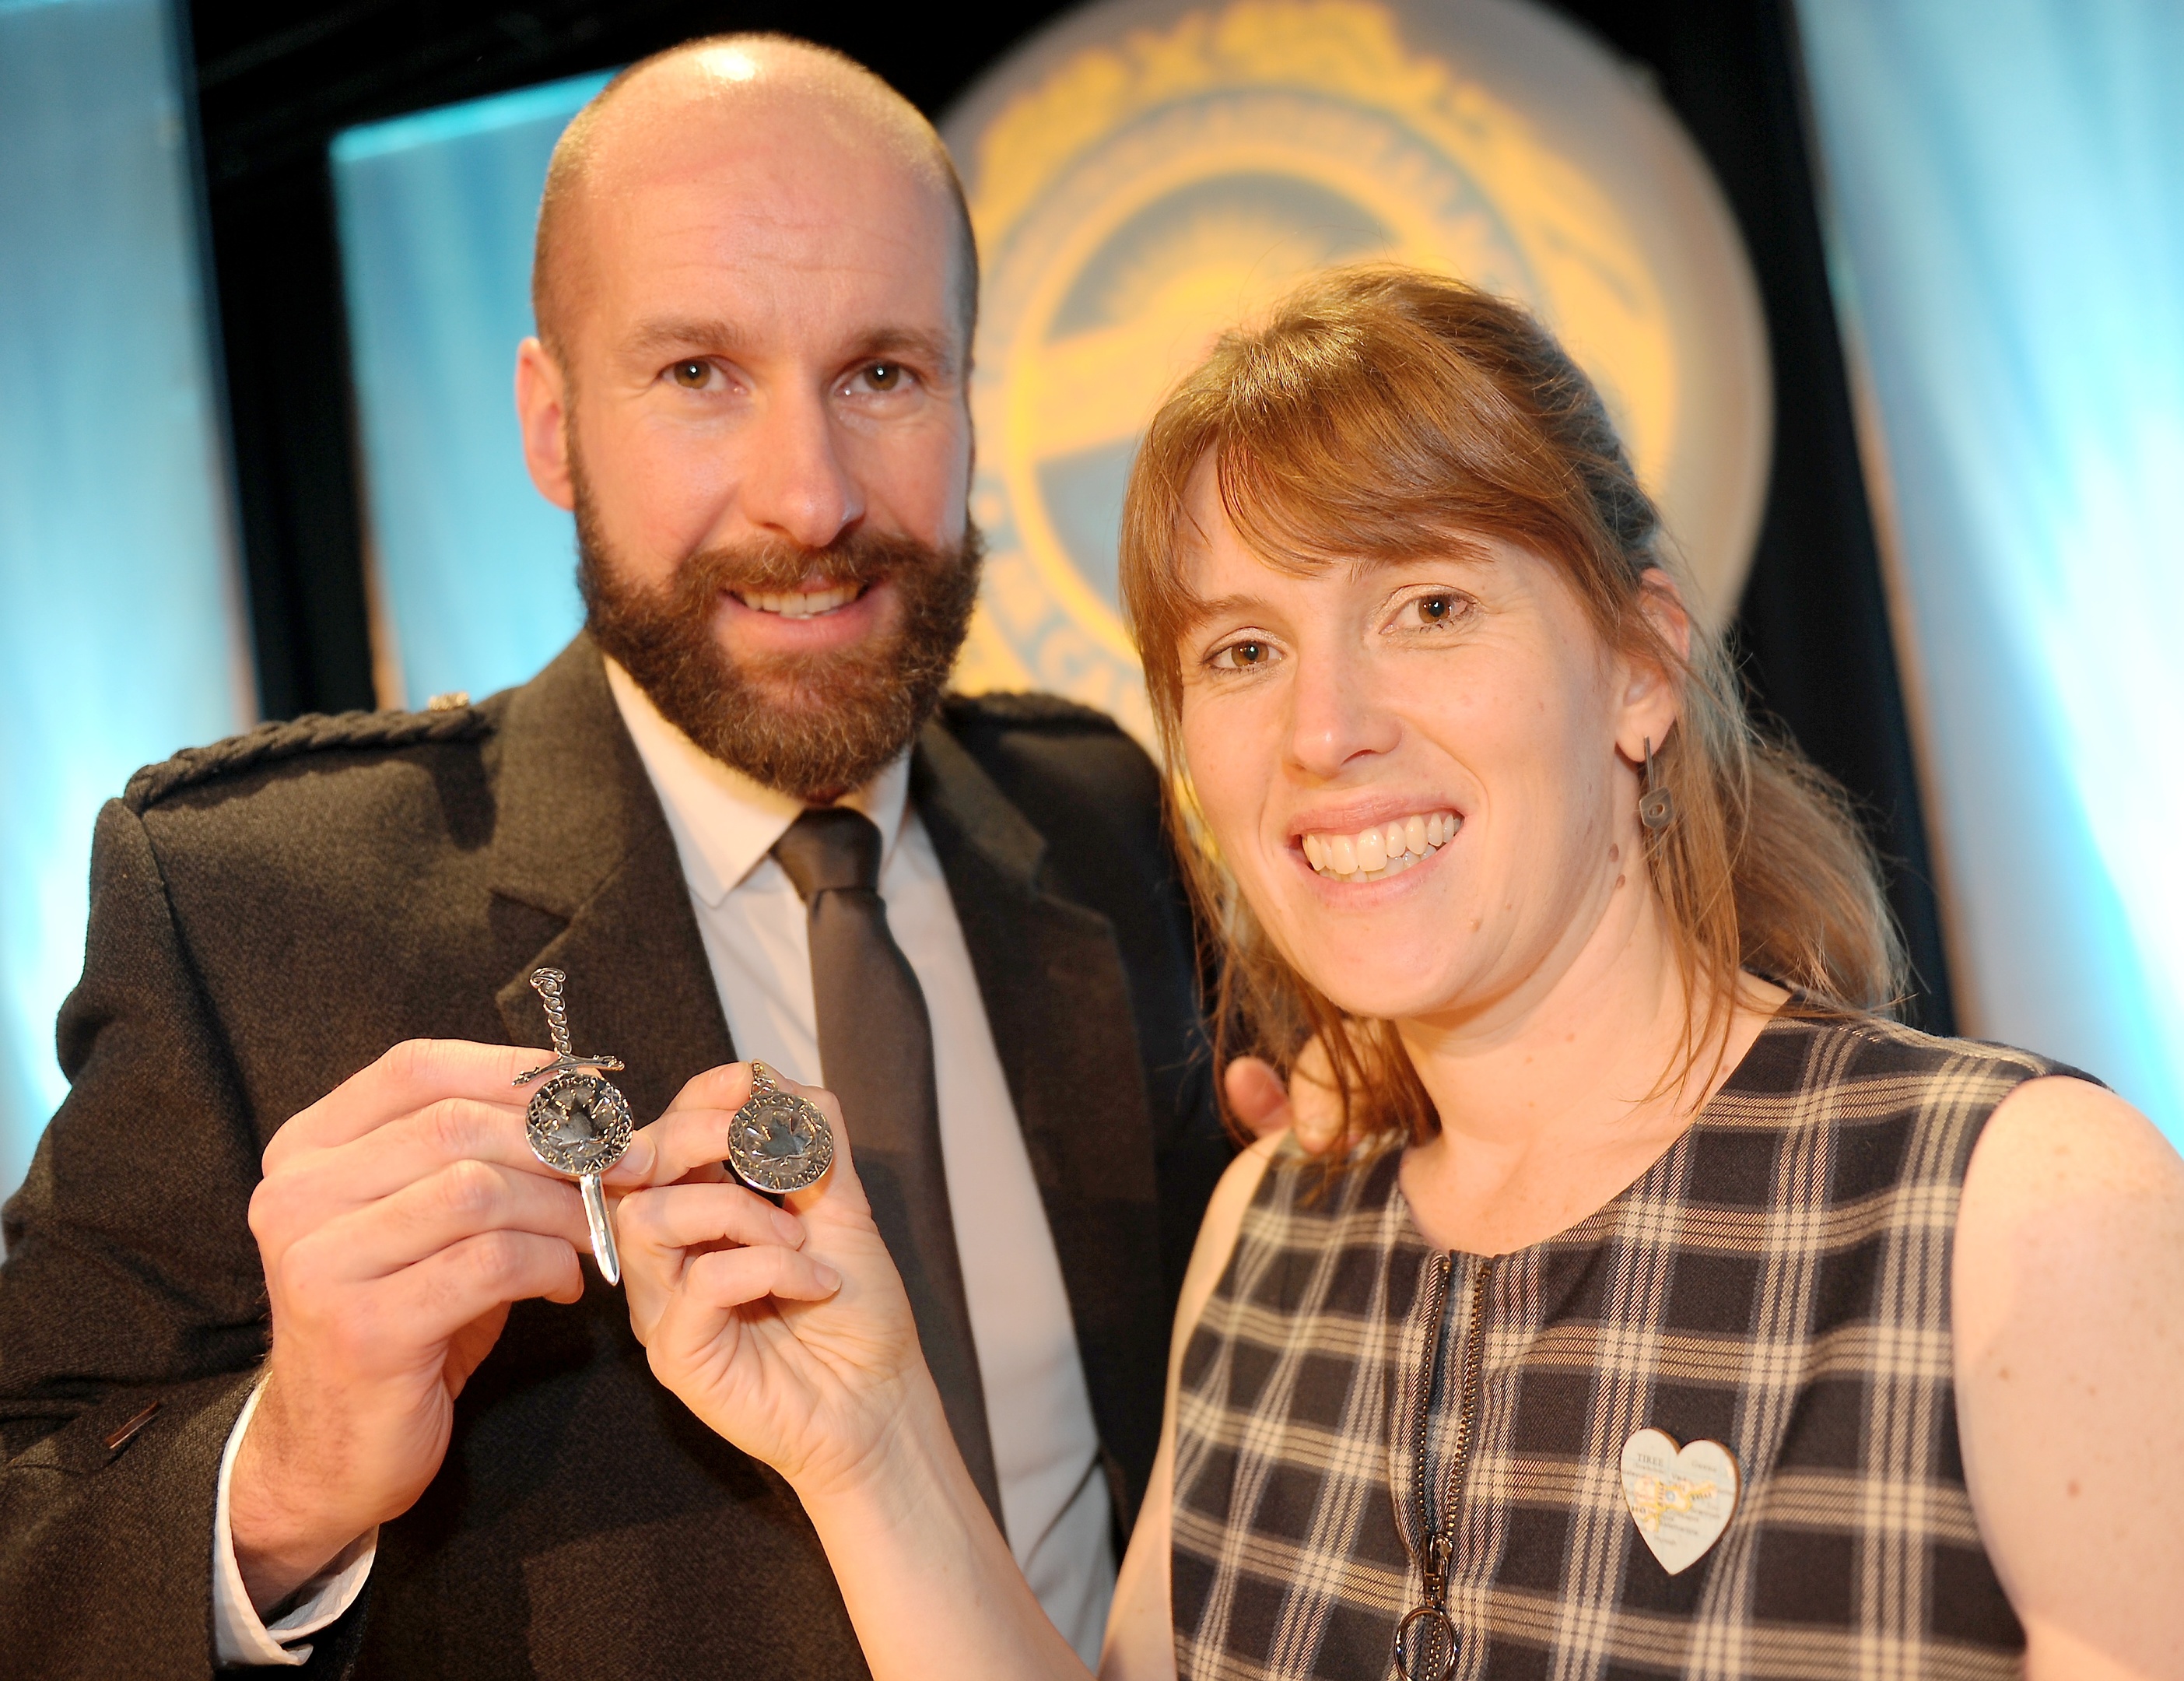 Silver Pendant winners Coinneach MacLeod of Glasgow and Ishbel Campbell of Tiree with their respective awards. Picture by Sandy McCook.